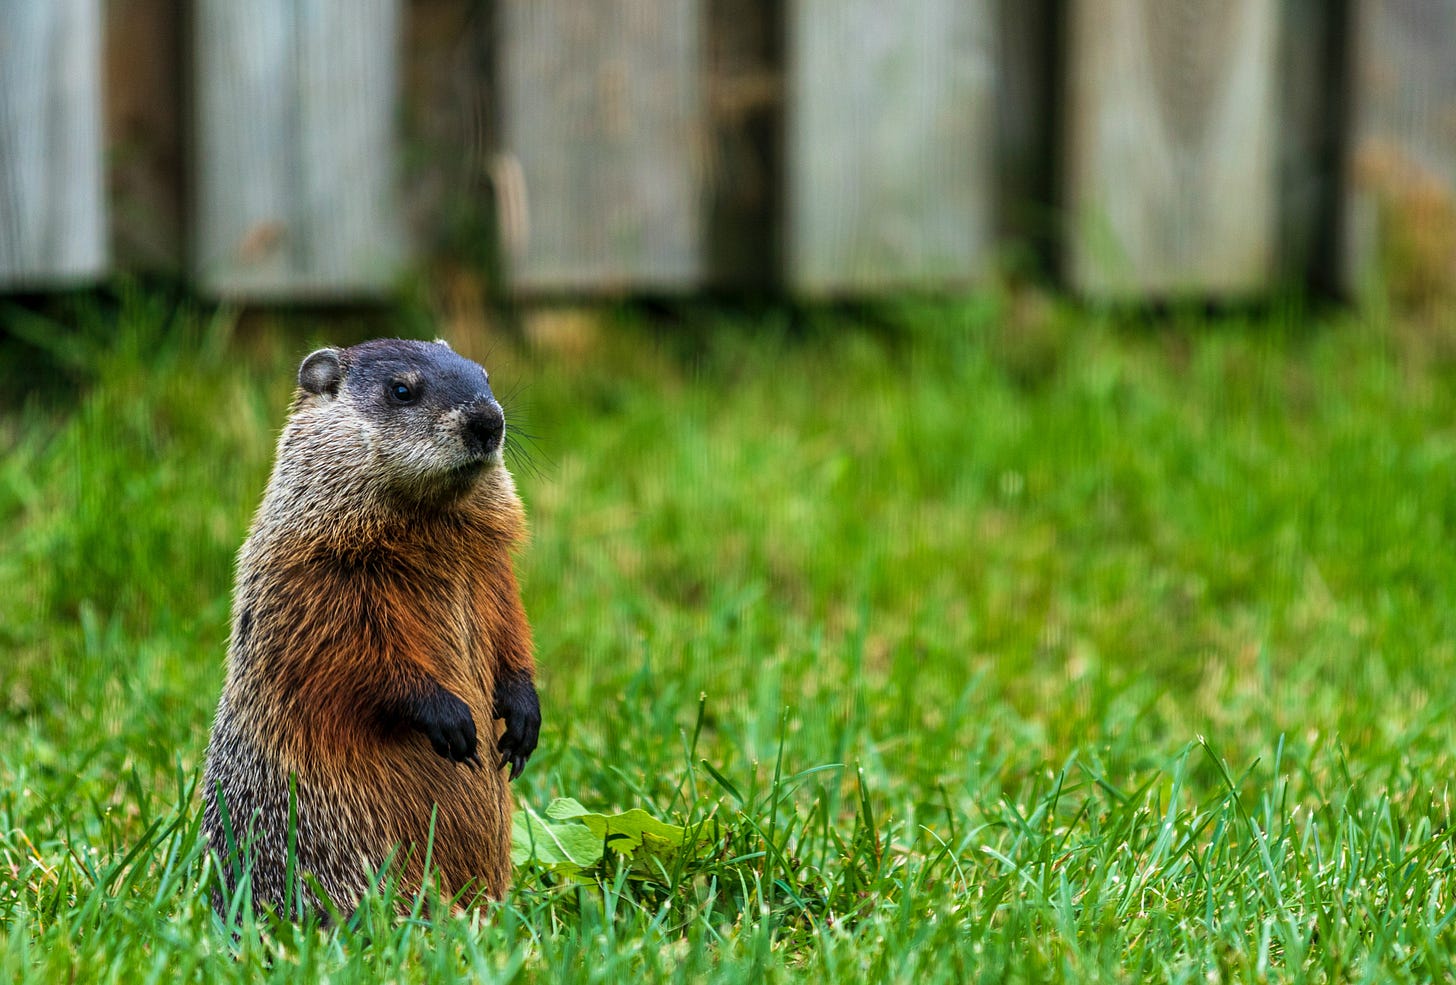 A groundhog sitting on its haunches in a suburban backyard